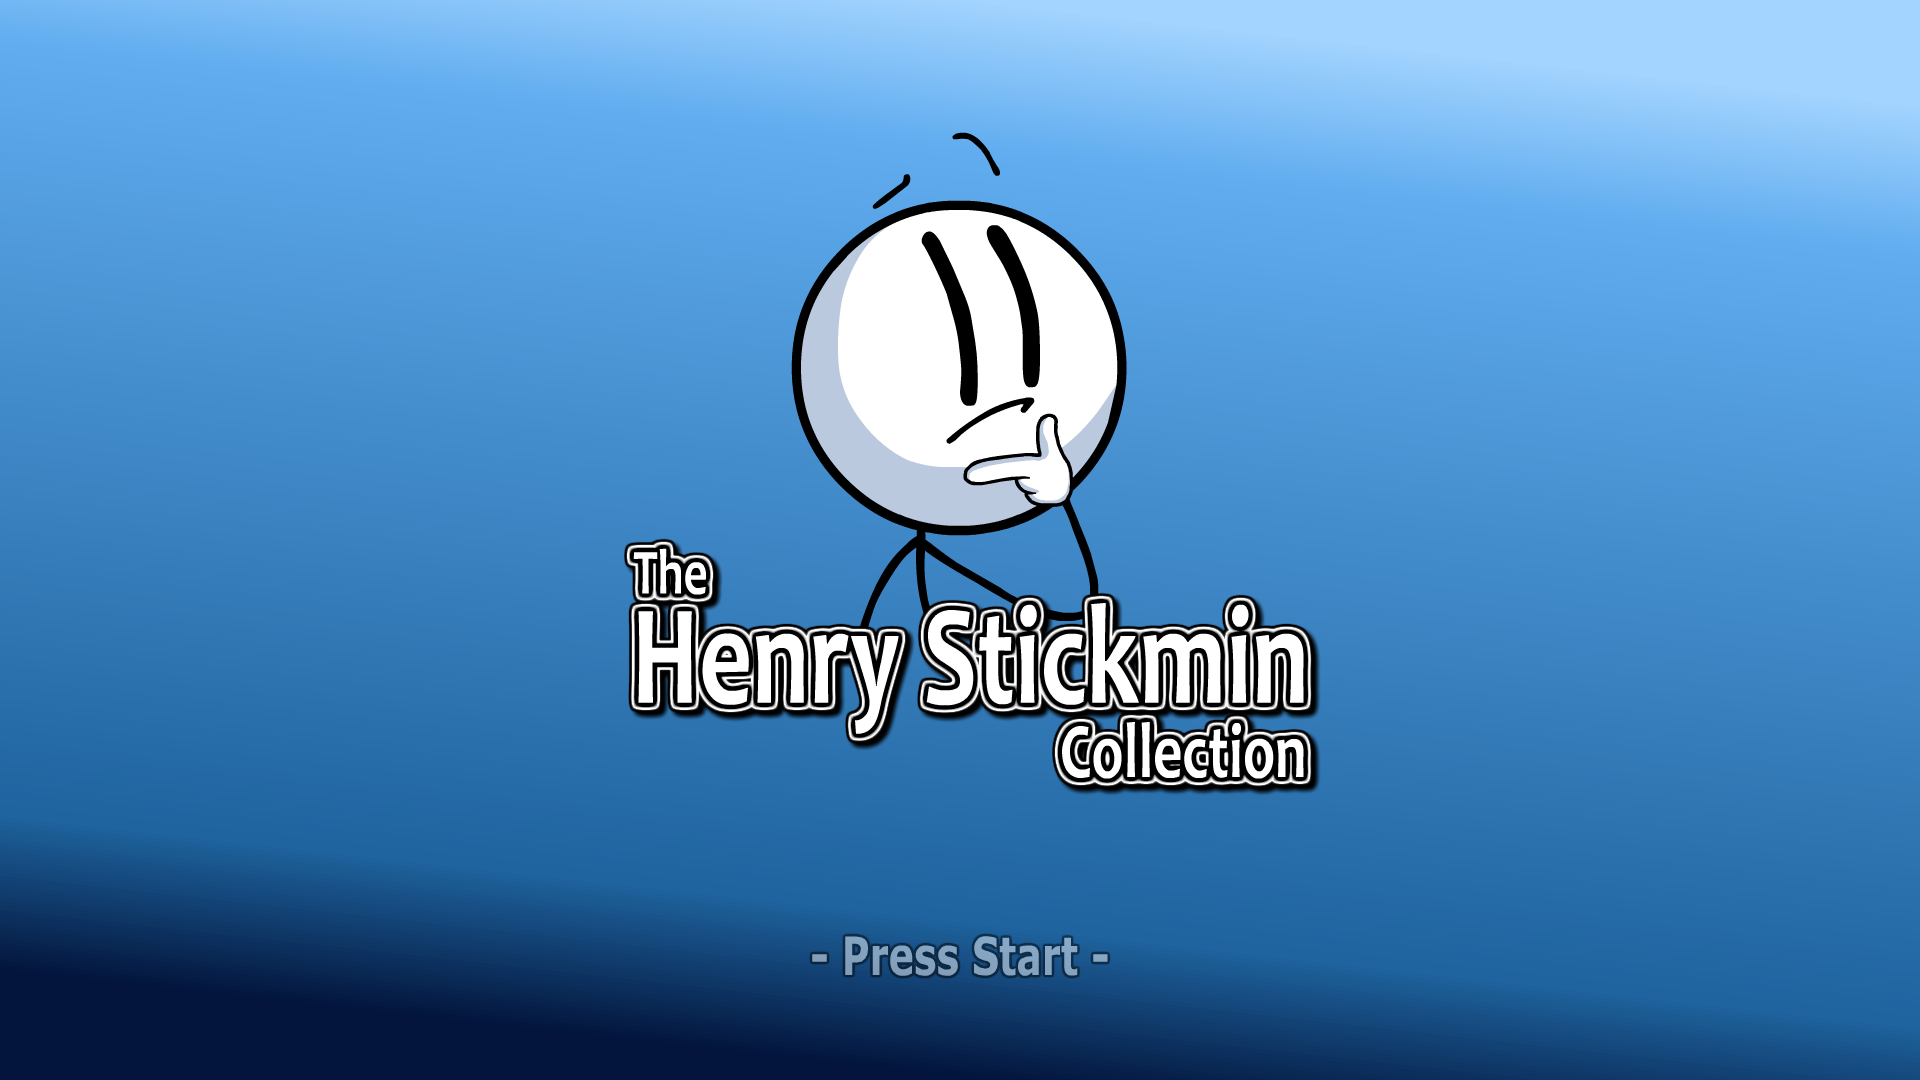 The henry stickman collection на русском. The Henry Stickman collection логотип. Henry Stickman collection Постер.